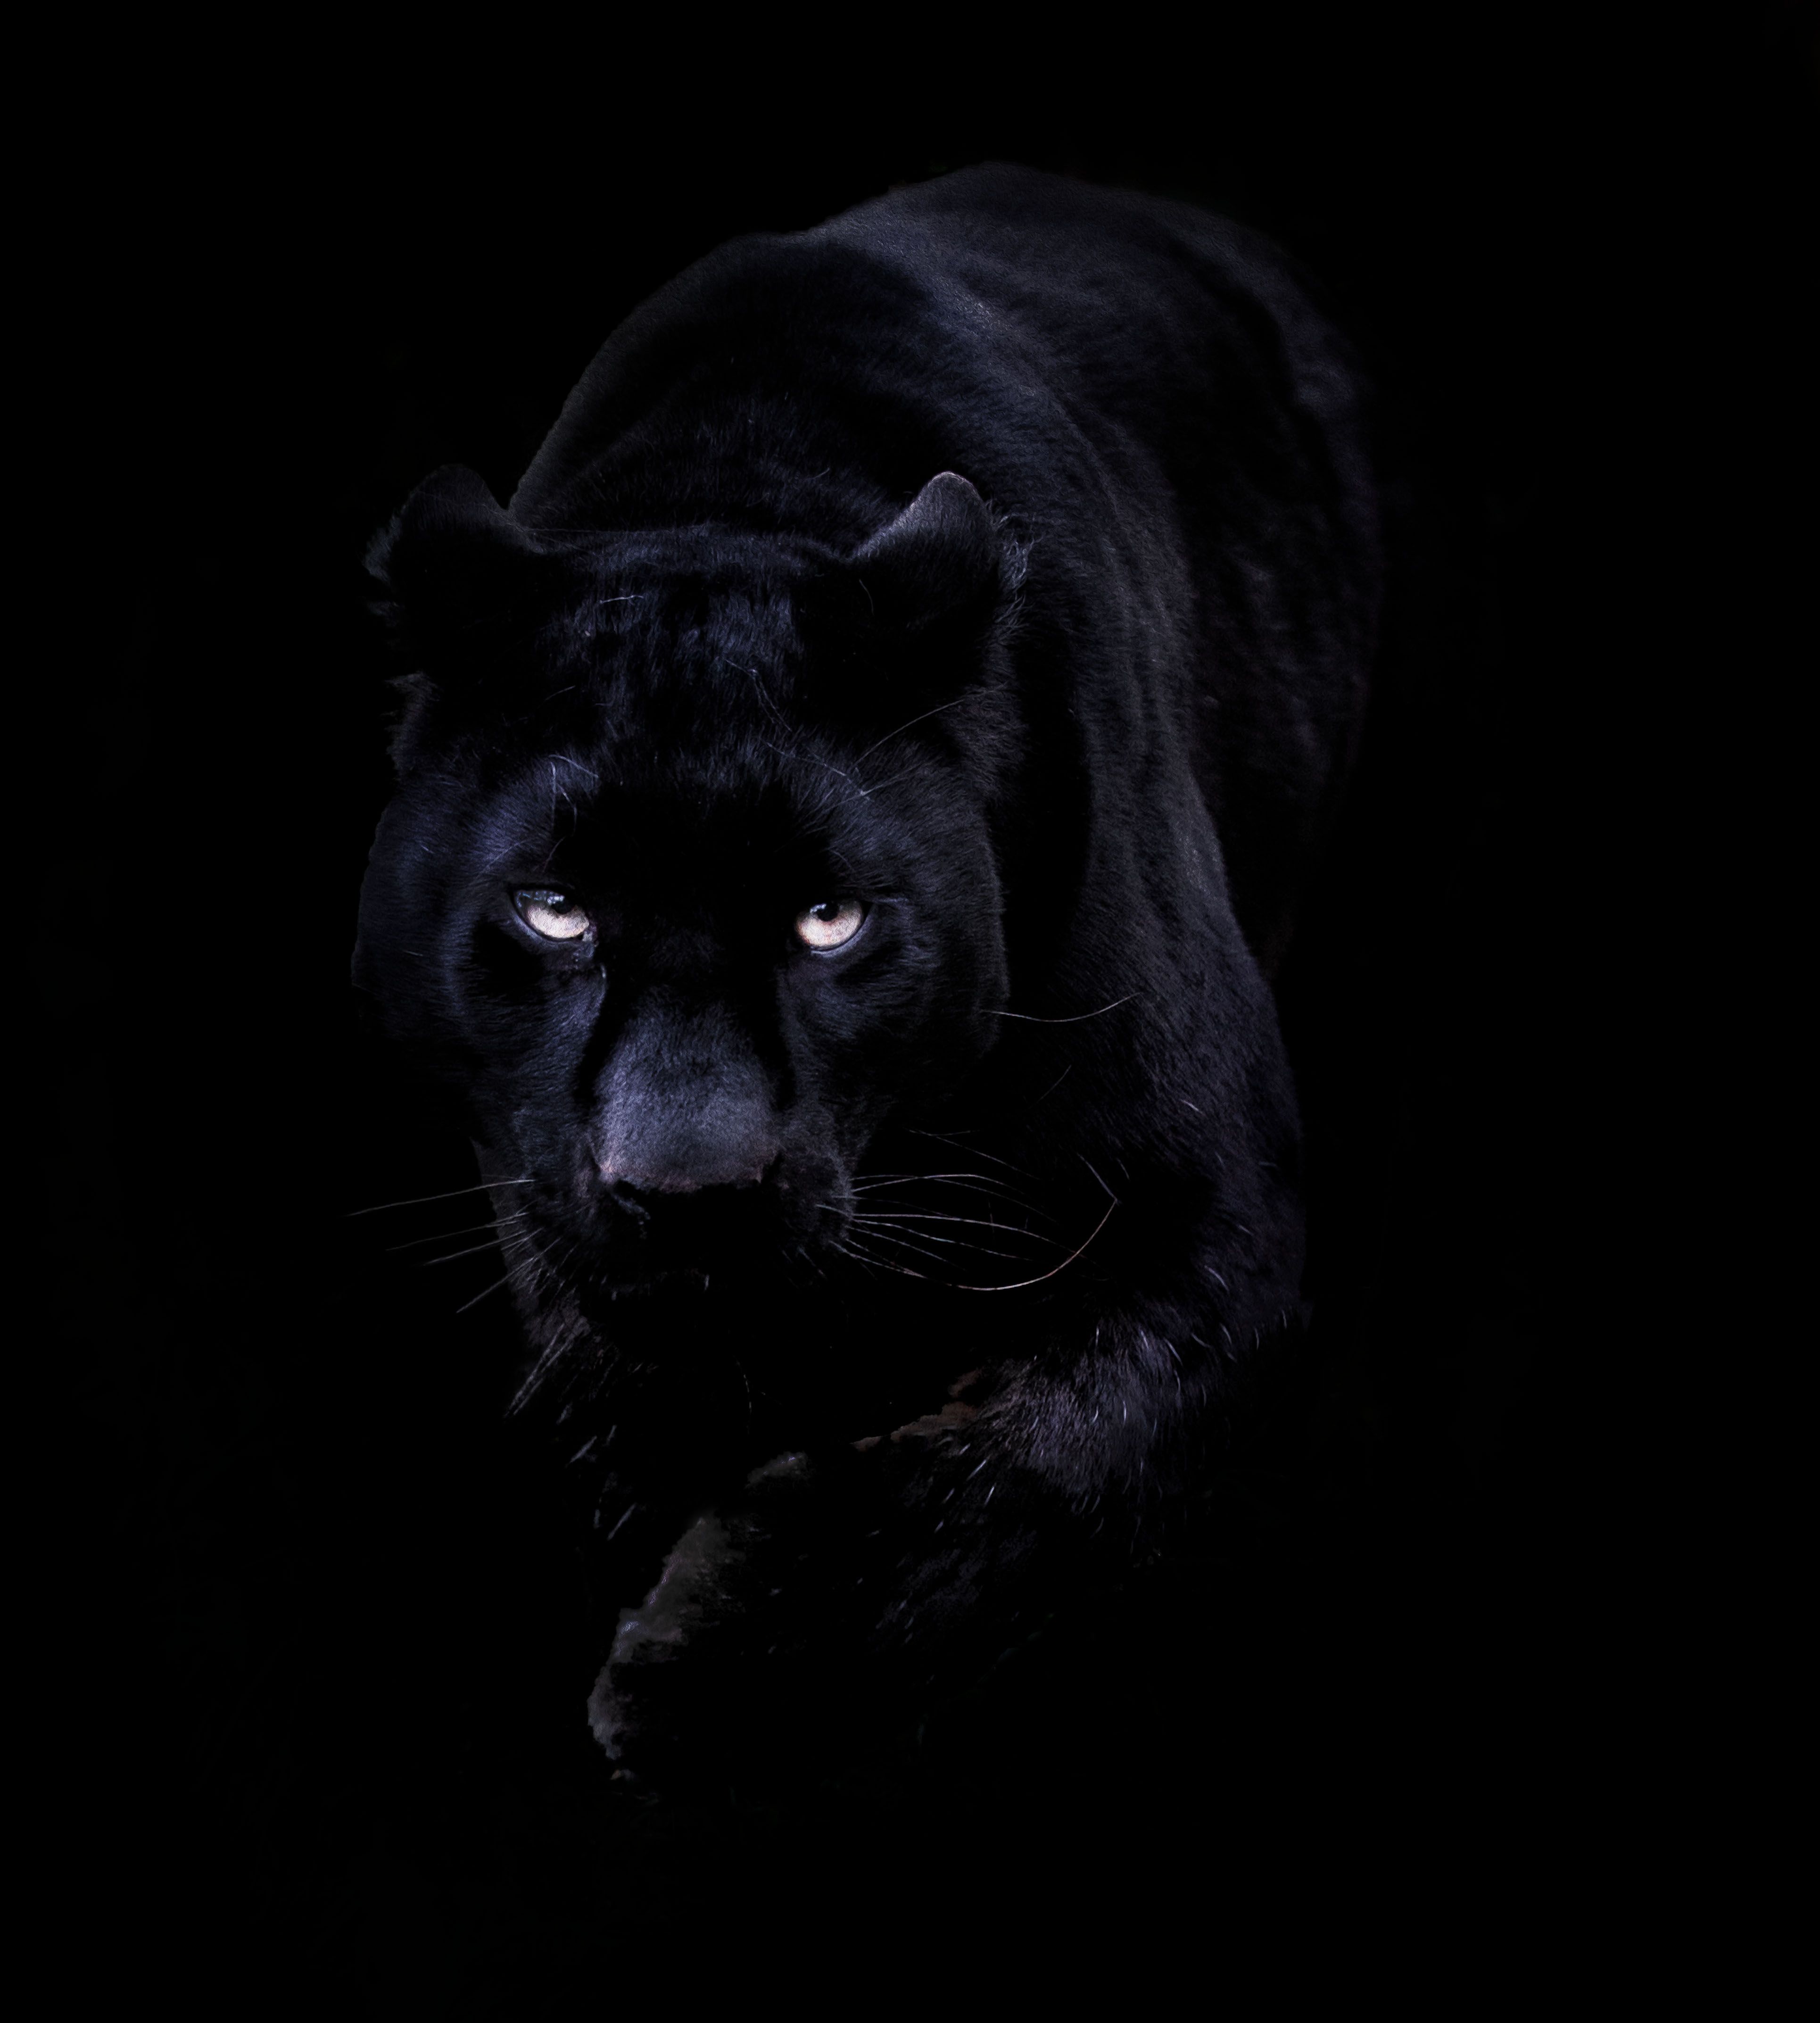 Black Panther Iphone Wallpapers.